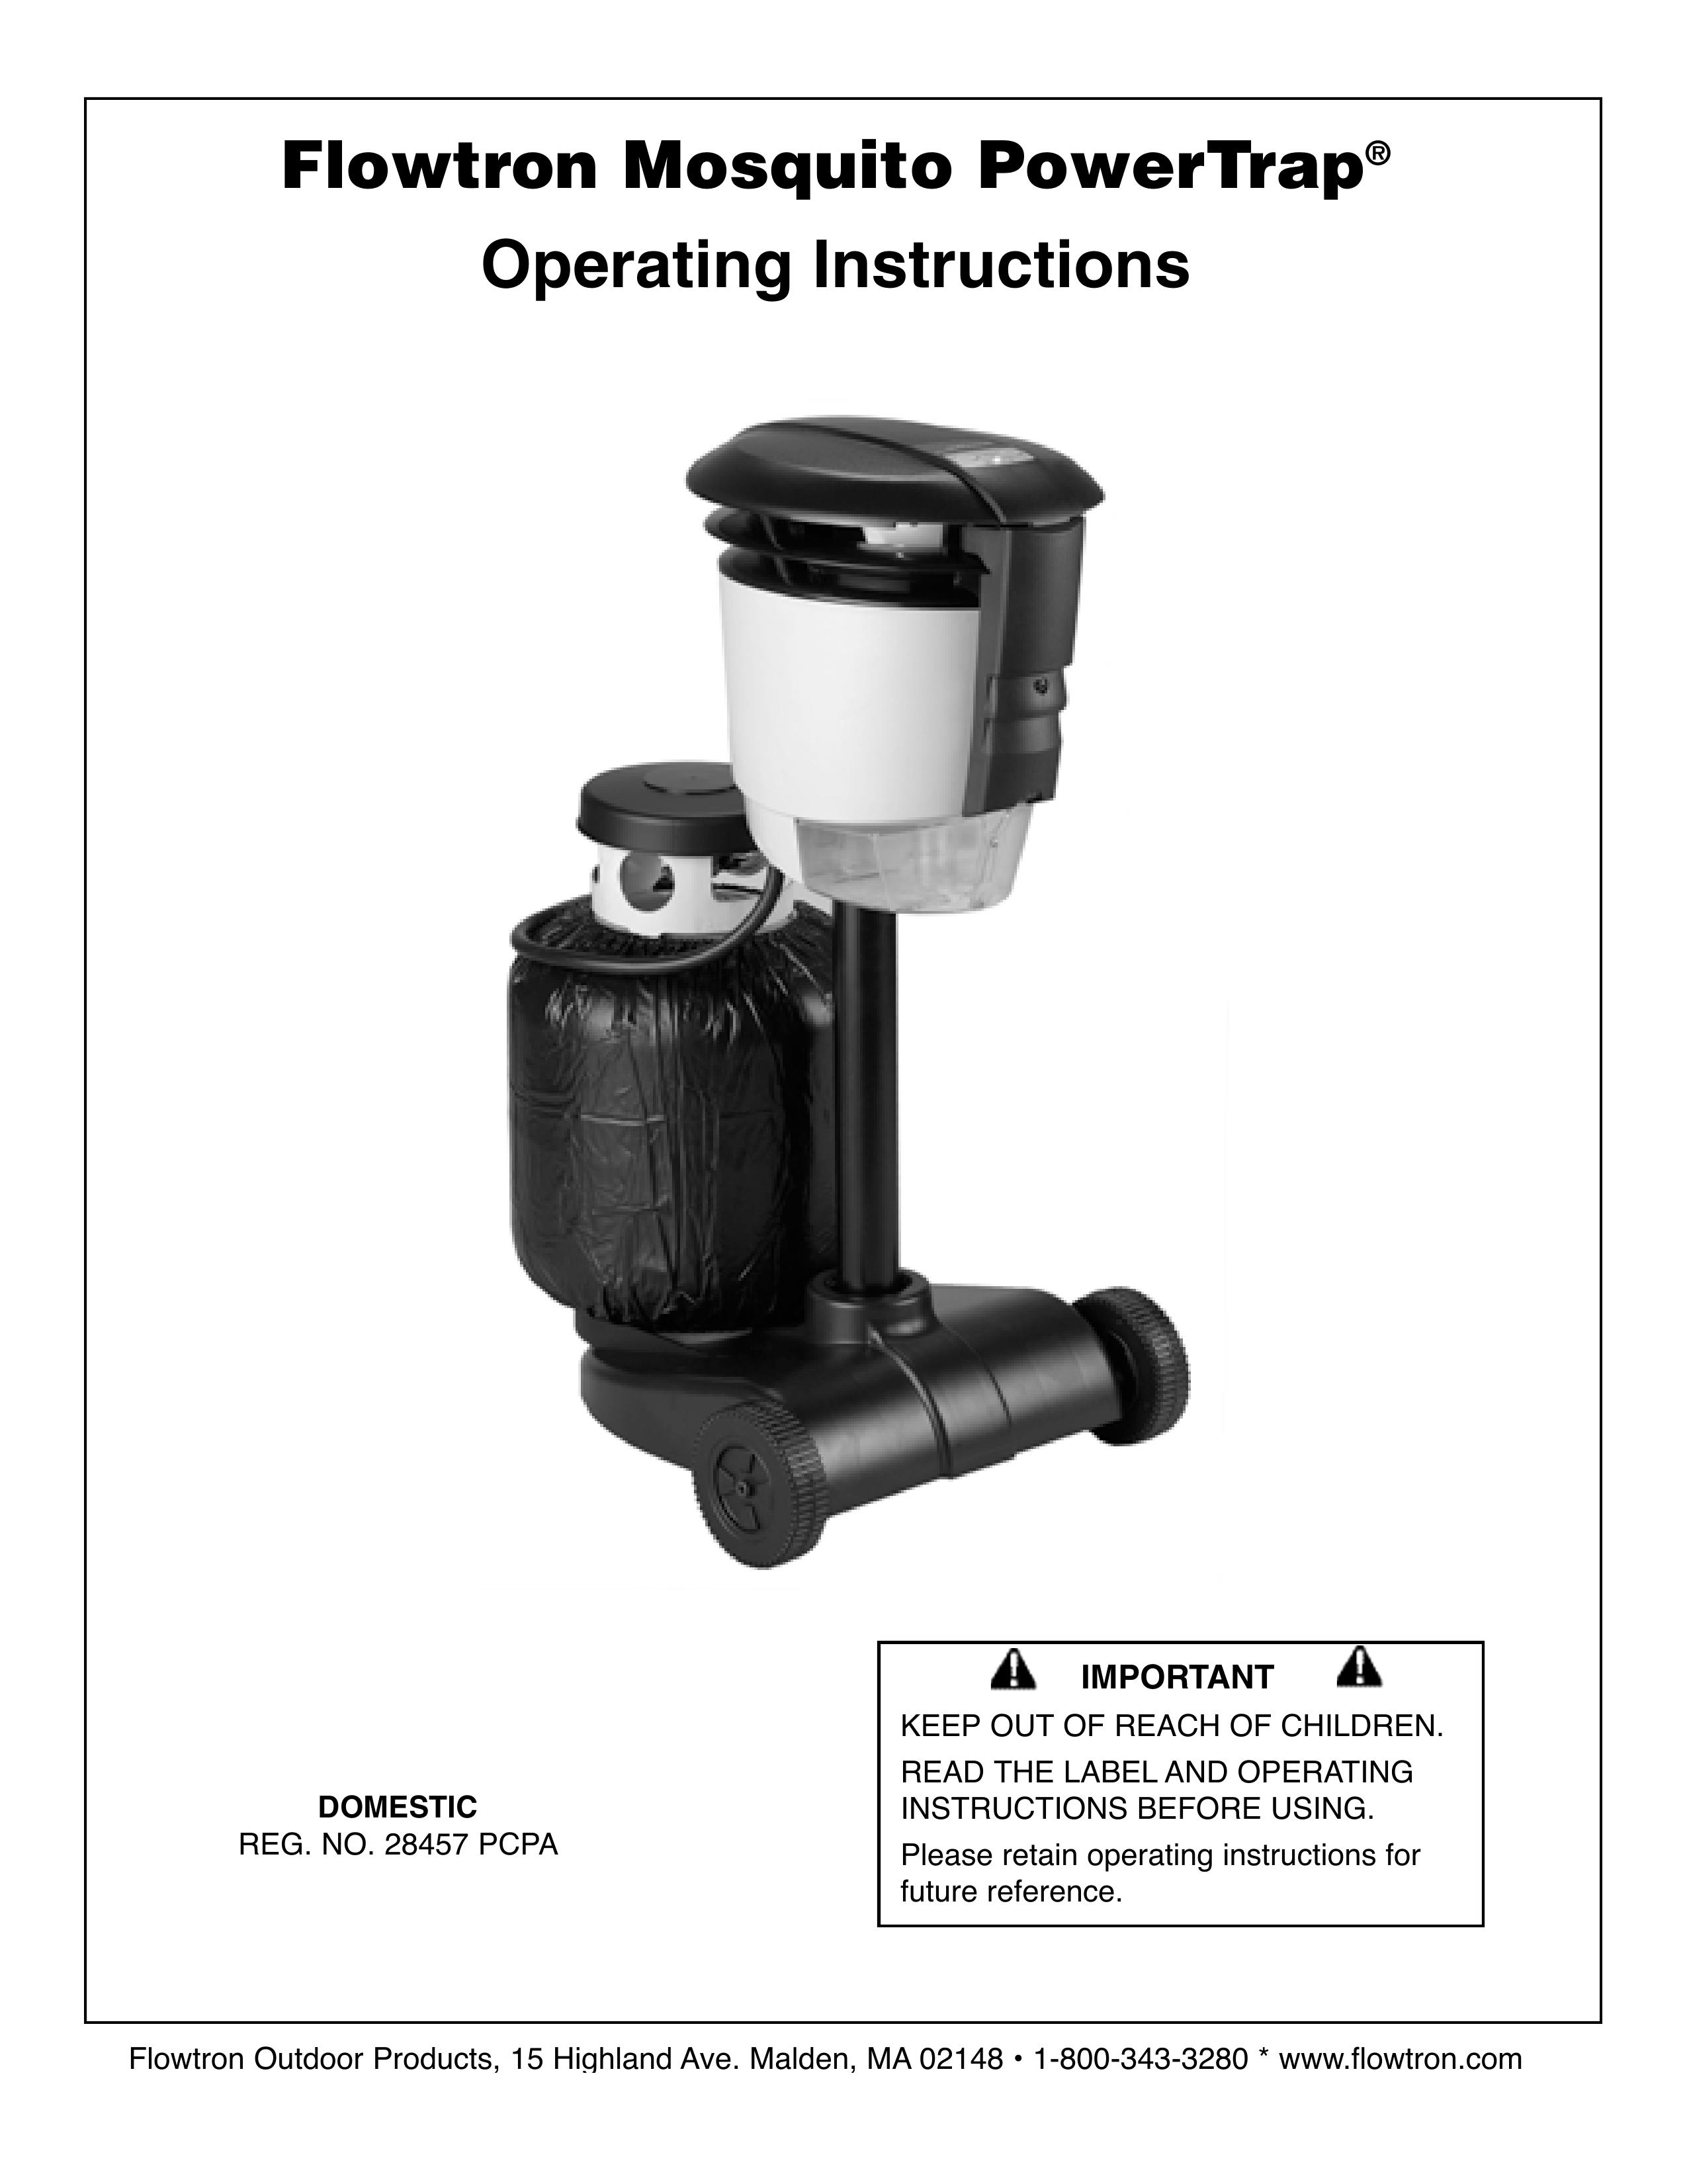 Flowtron Outdoor Products MT-200 Series Insect Control Equipment User Manual